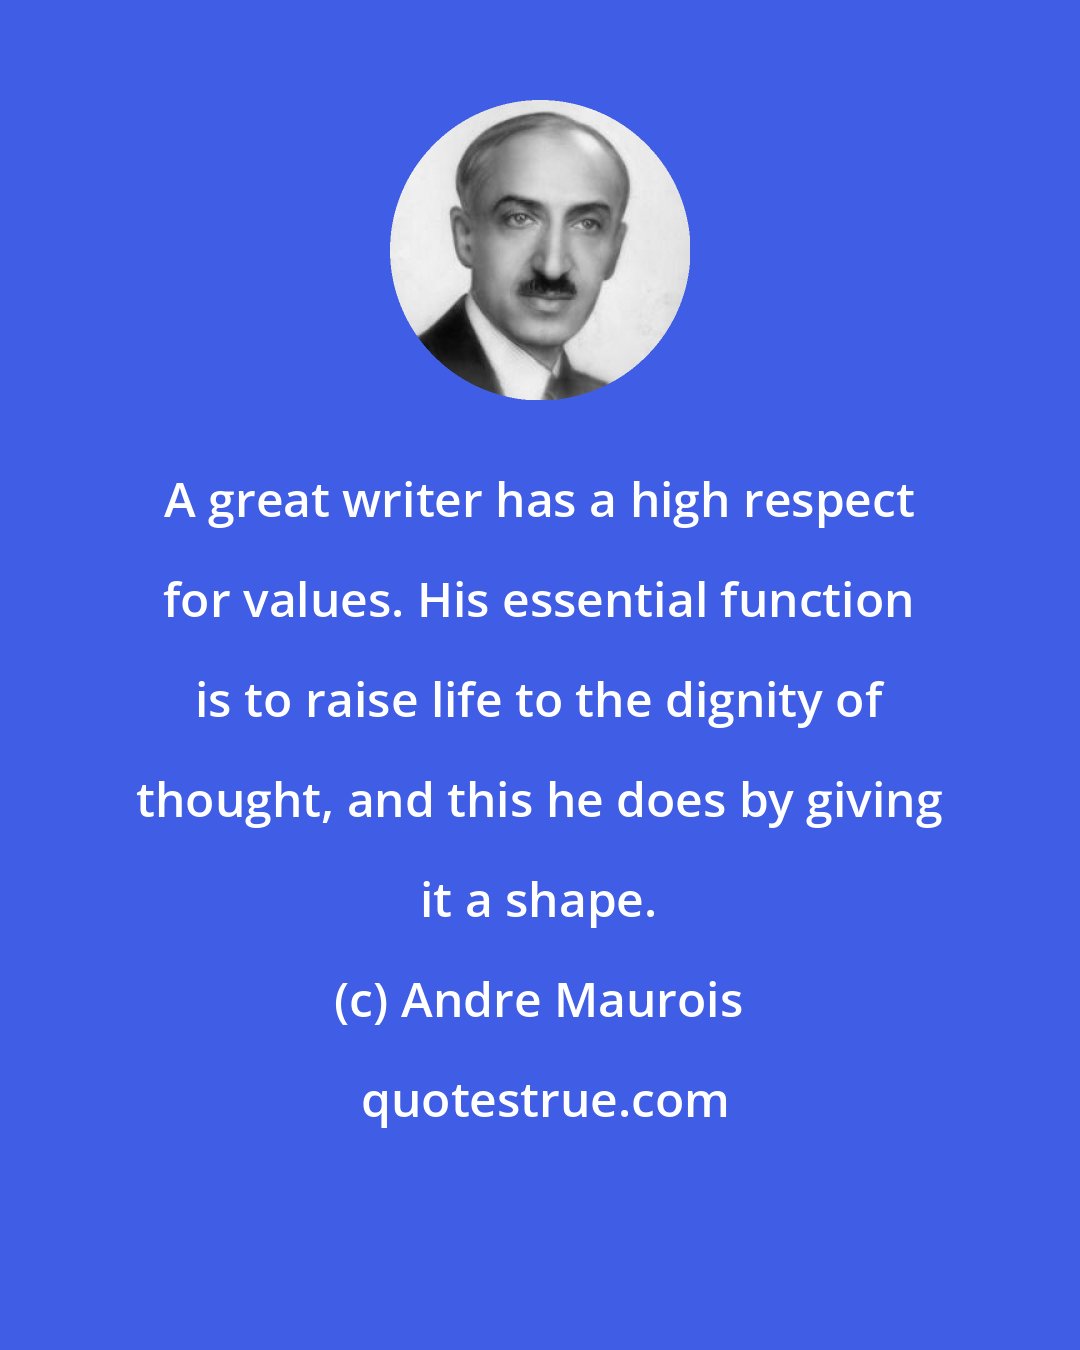 Andre Maurois: A great writer has a high respect for values. His essential function is to raise life to the dignity of thought, and this he does by giving it a shape.